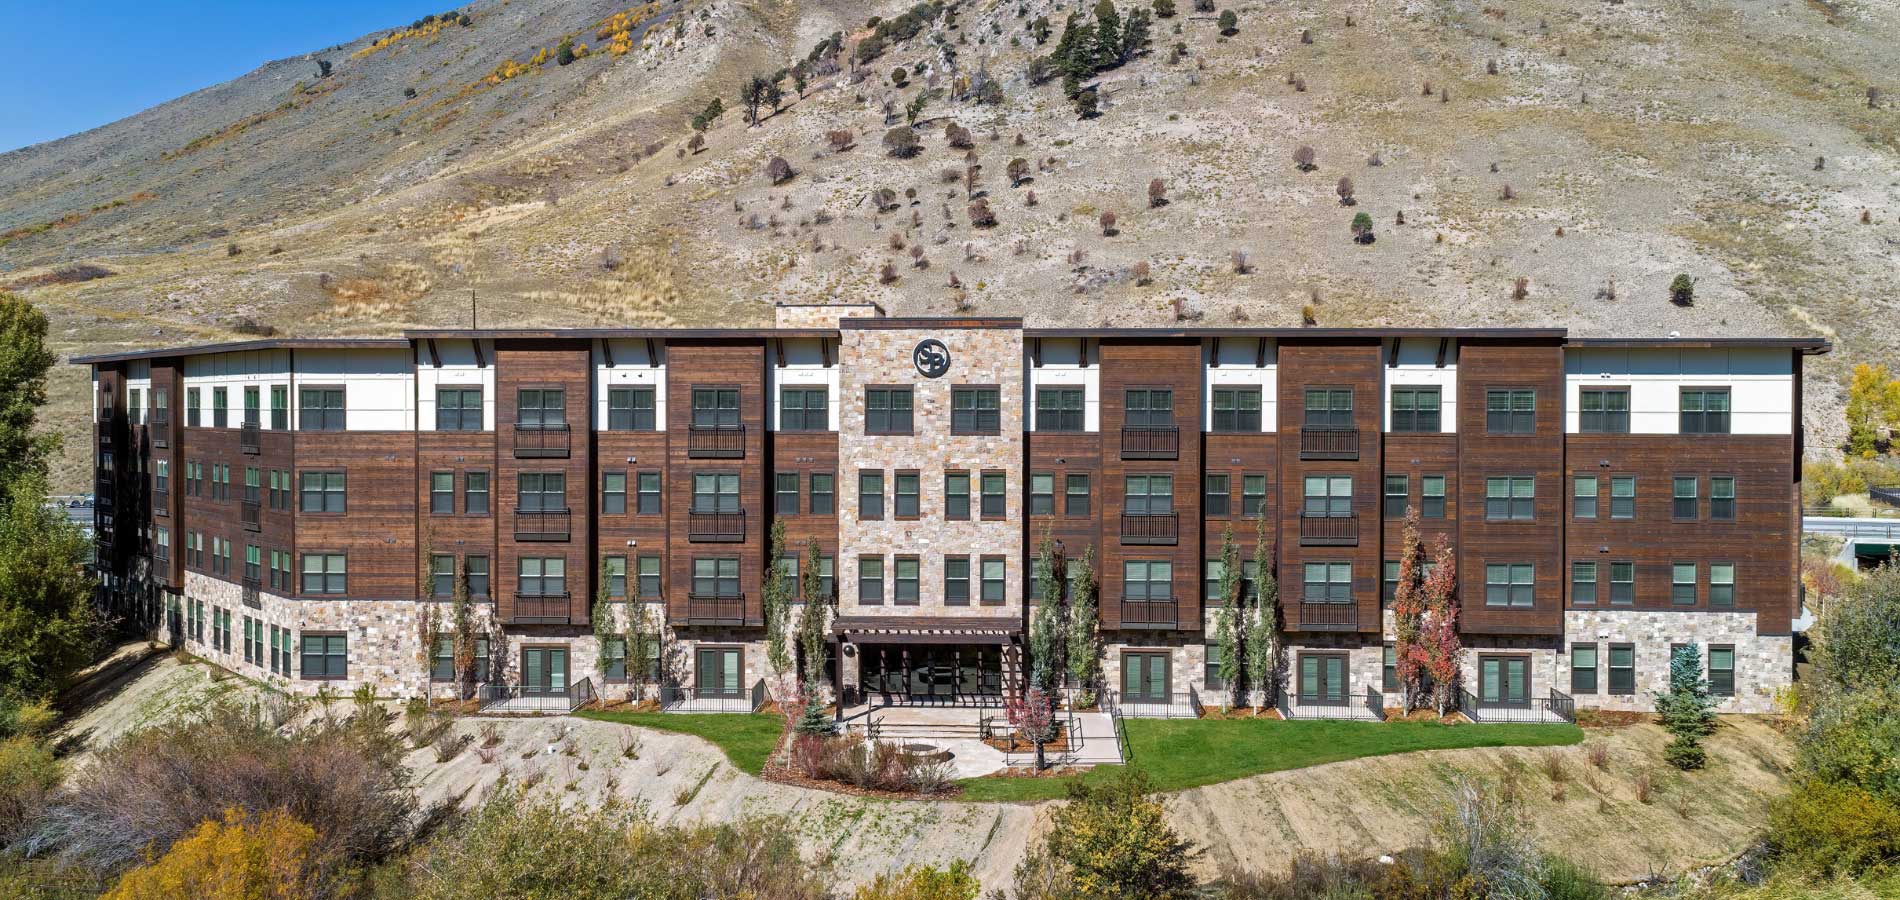 sage-apartments---ranchwood-tackroom---montana-timber-products-home-page